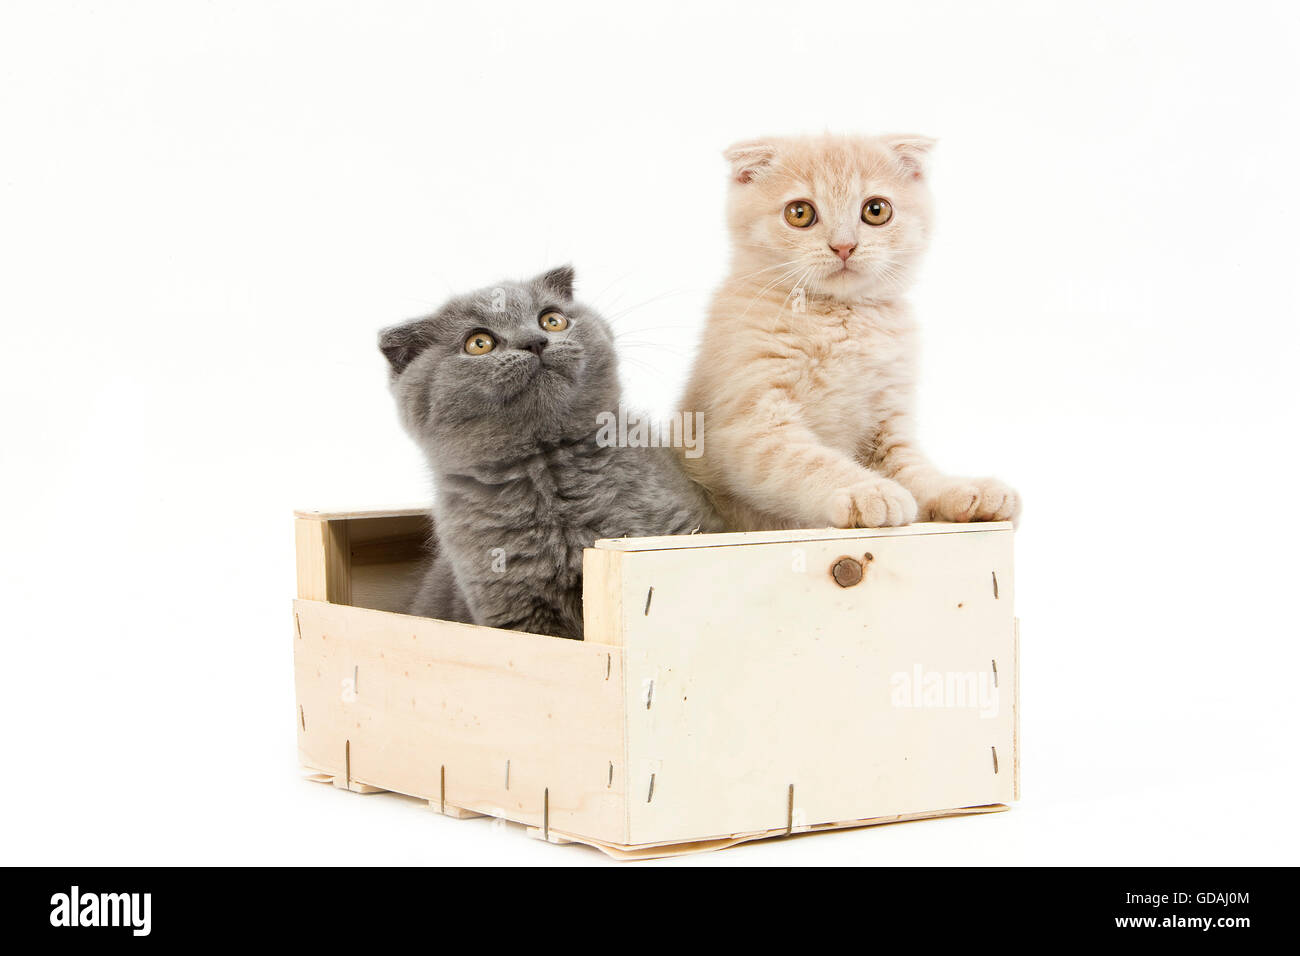 CREAM AND BLUE SCOTTISH FOLD DOMESTIC CAT, 2 MONTHS OLD KITTEN PLAYING IN A CRATE Stock Photo